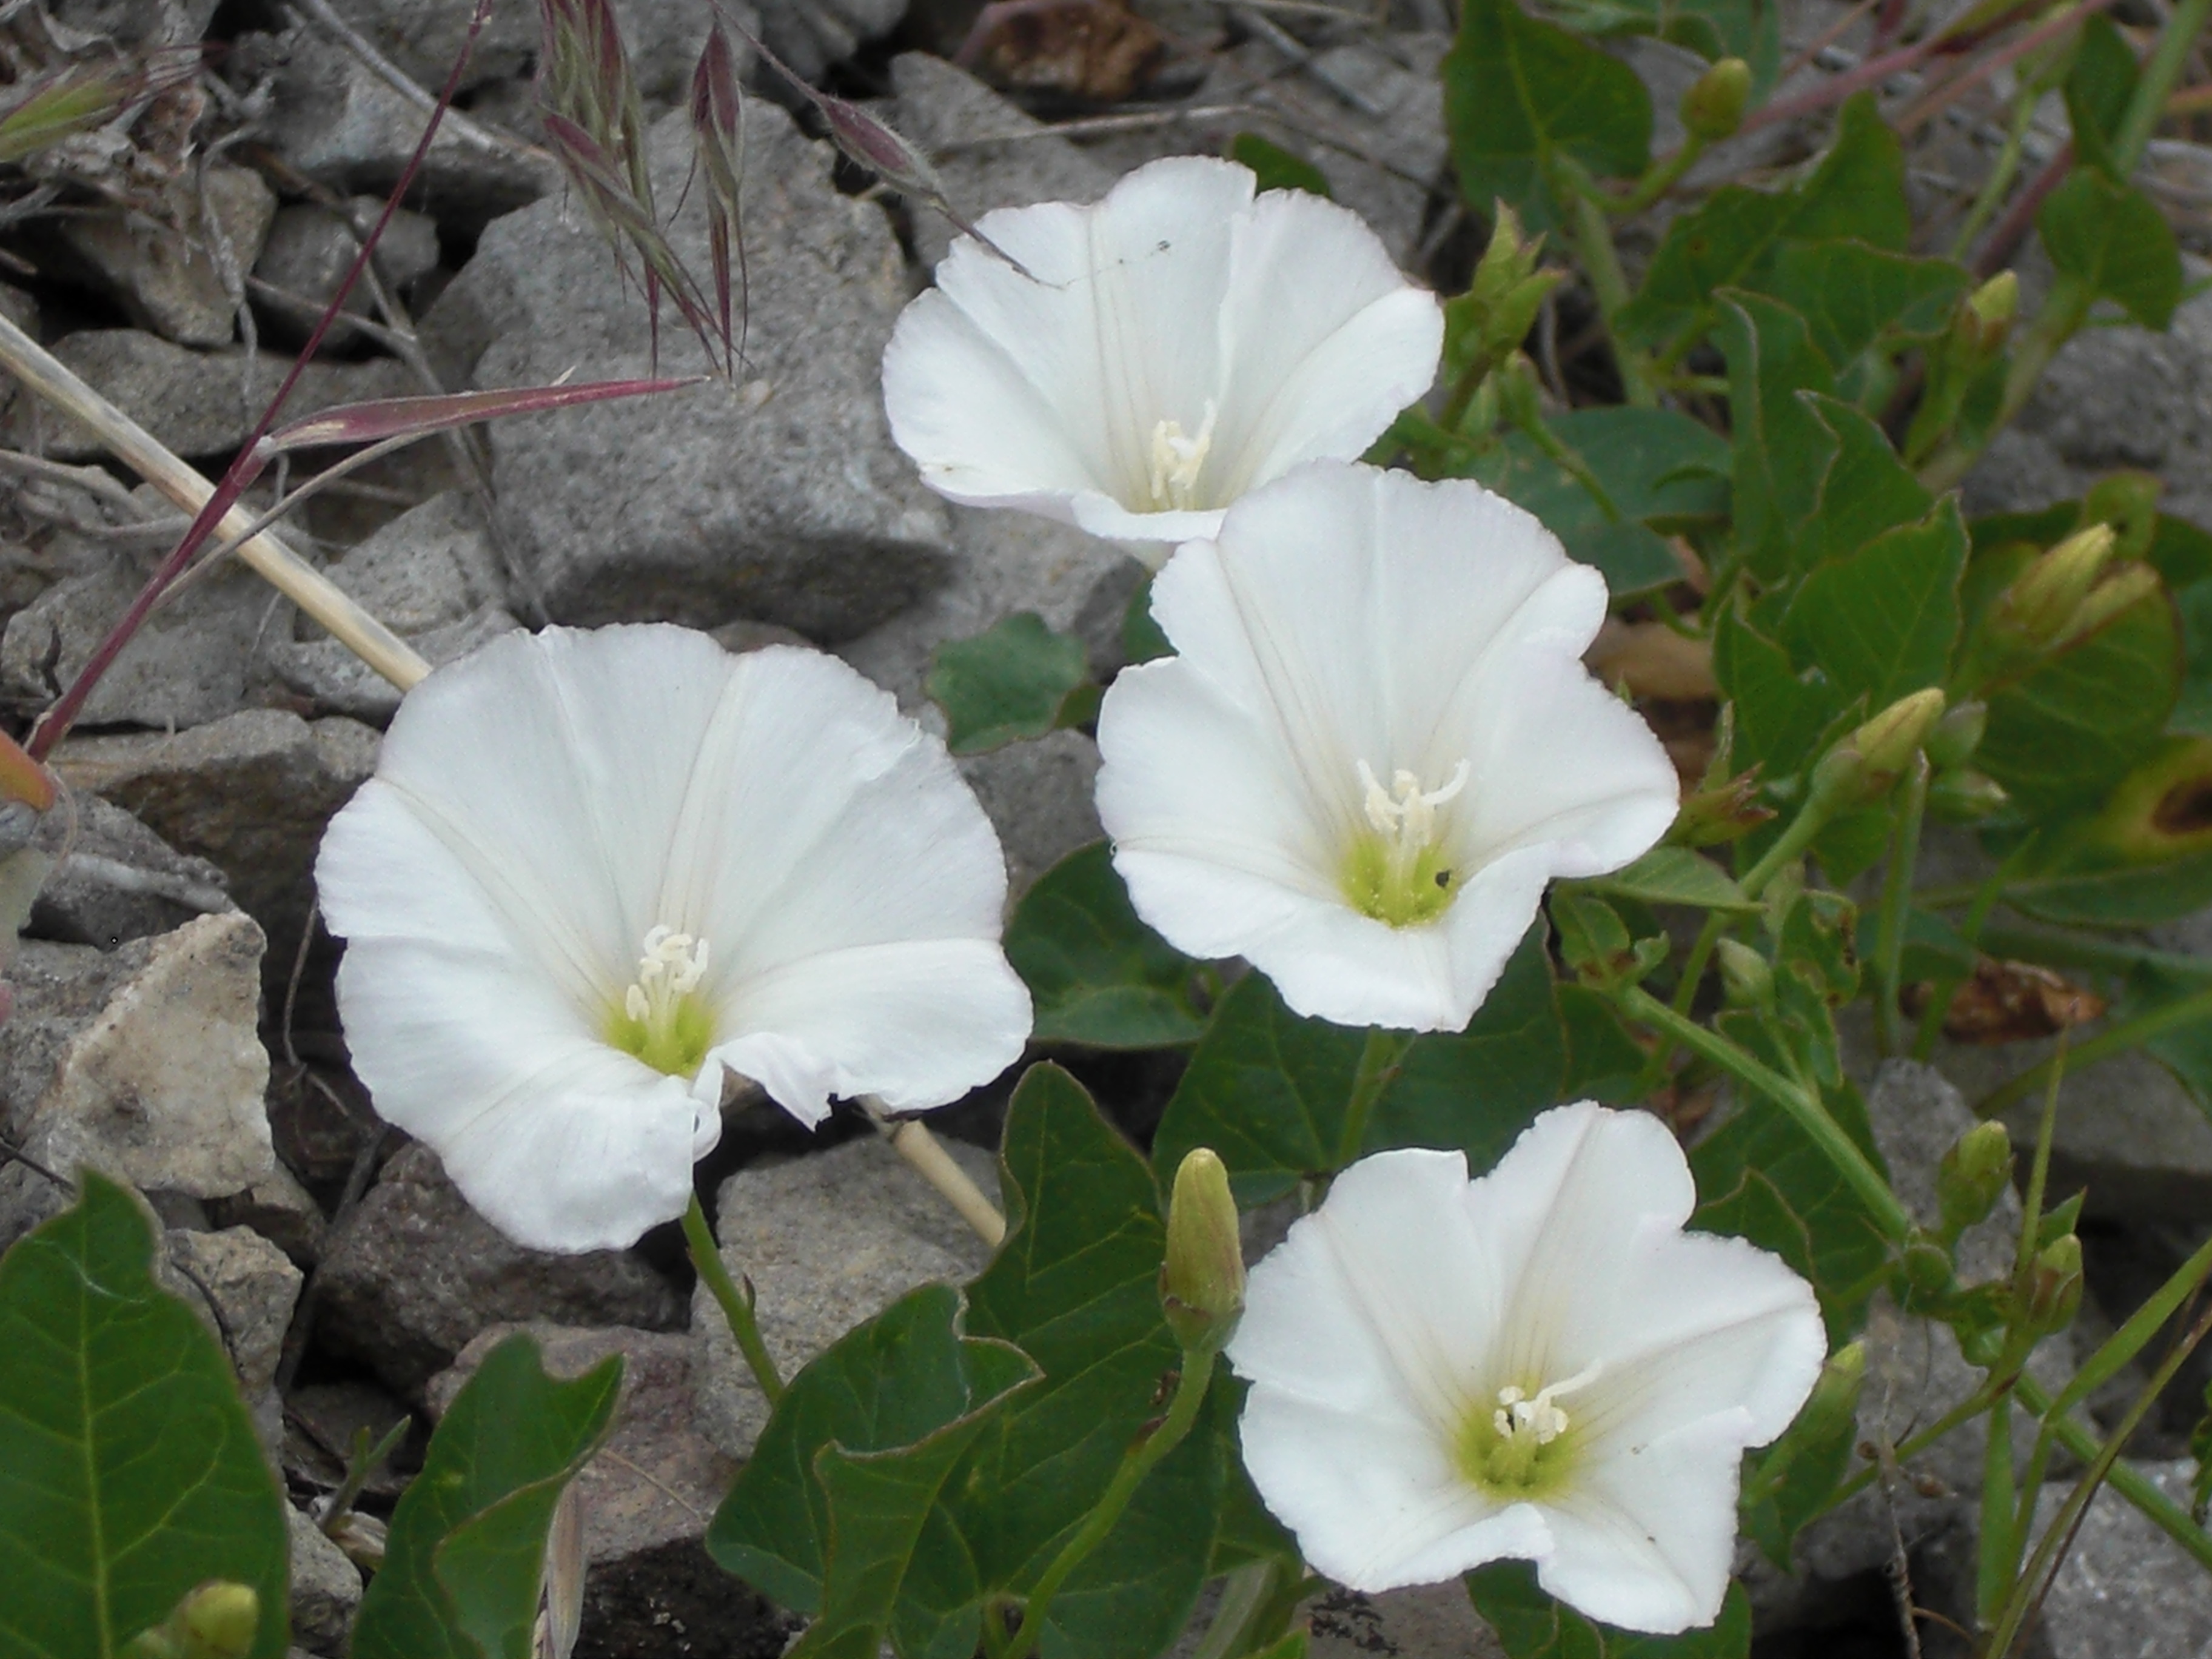 Viney stems, foliage, and white blossoms sprawling along the ground